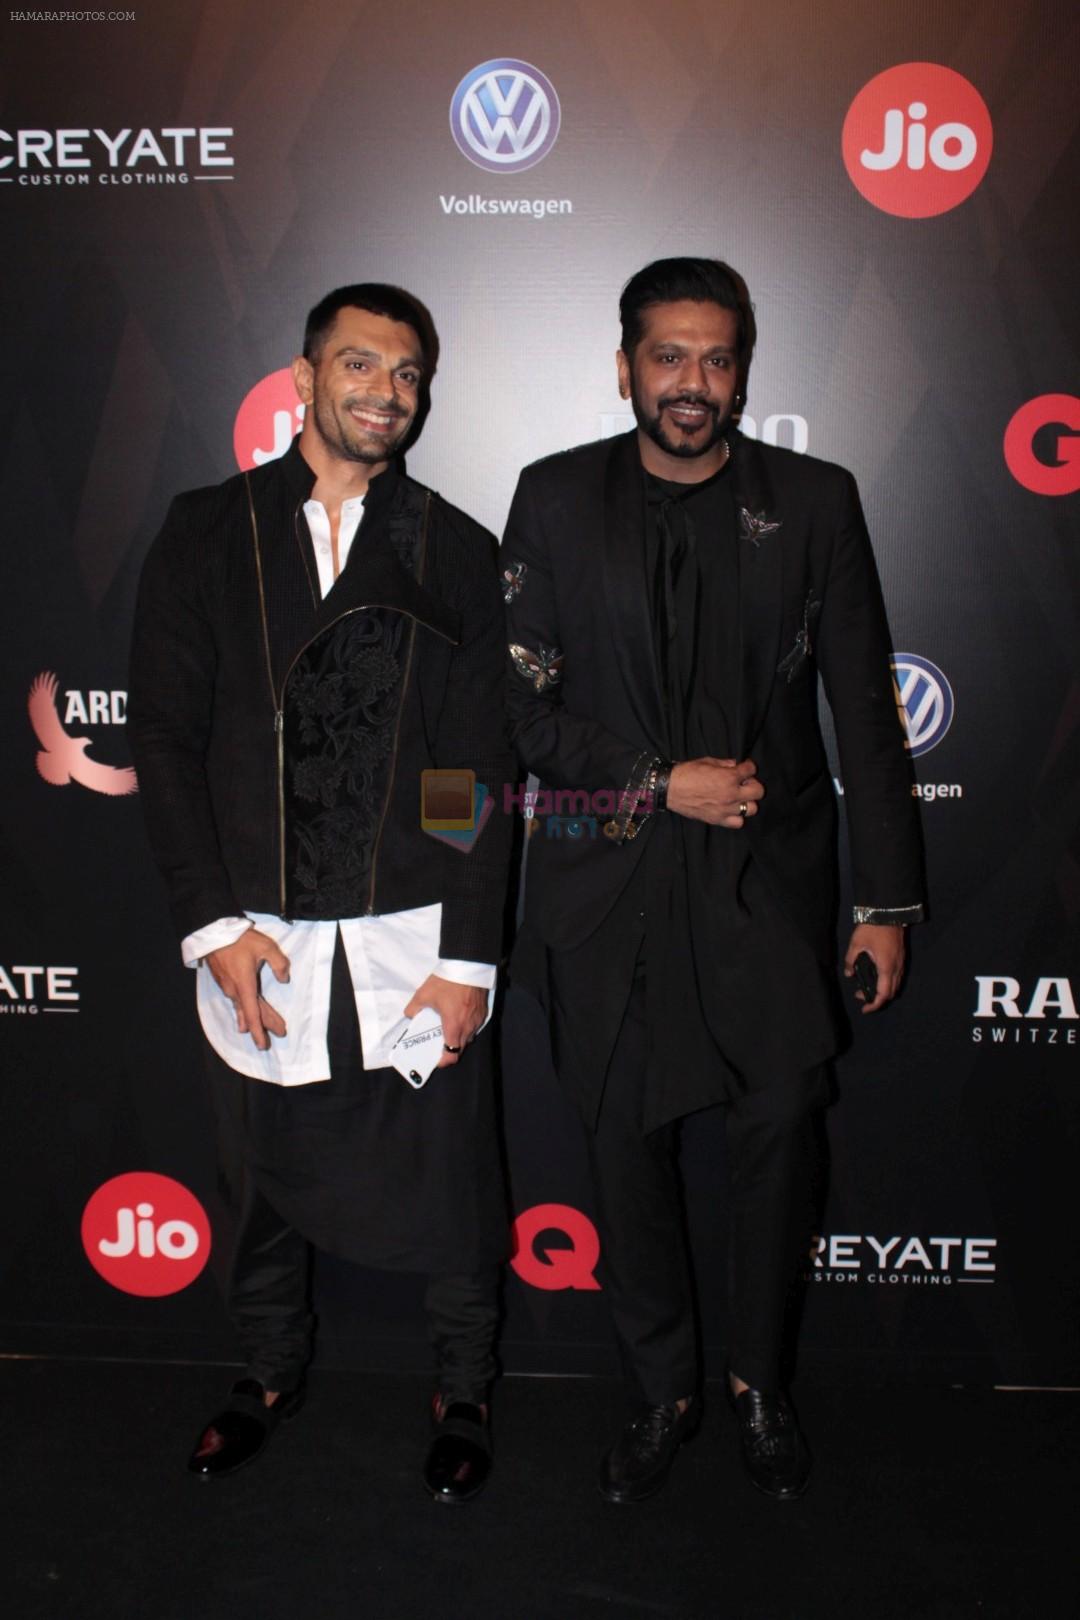 Karan Singh Grover, Rocky S at Star Studded Red Carpet For GQ Best Dressed 2017 on 4th June 2017